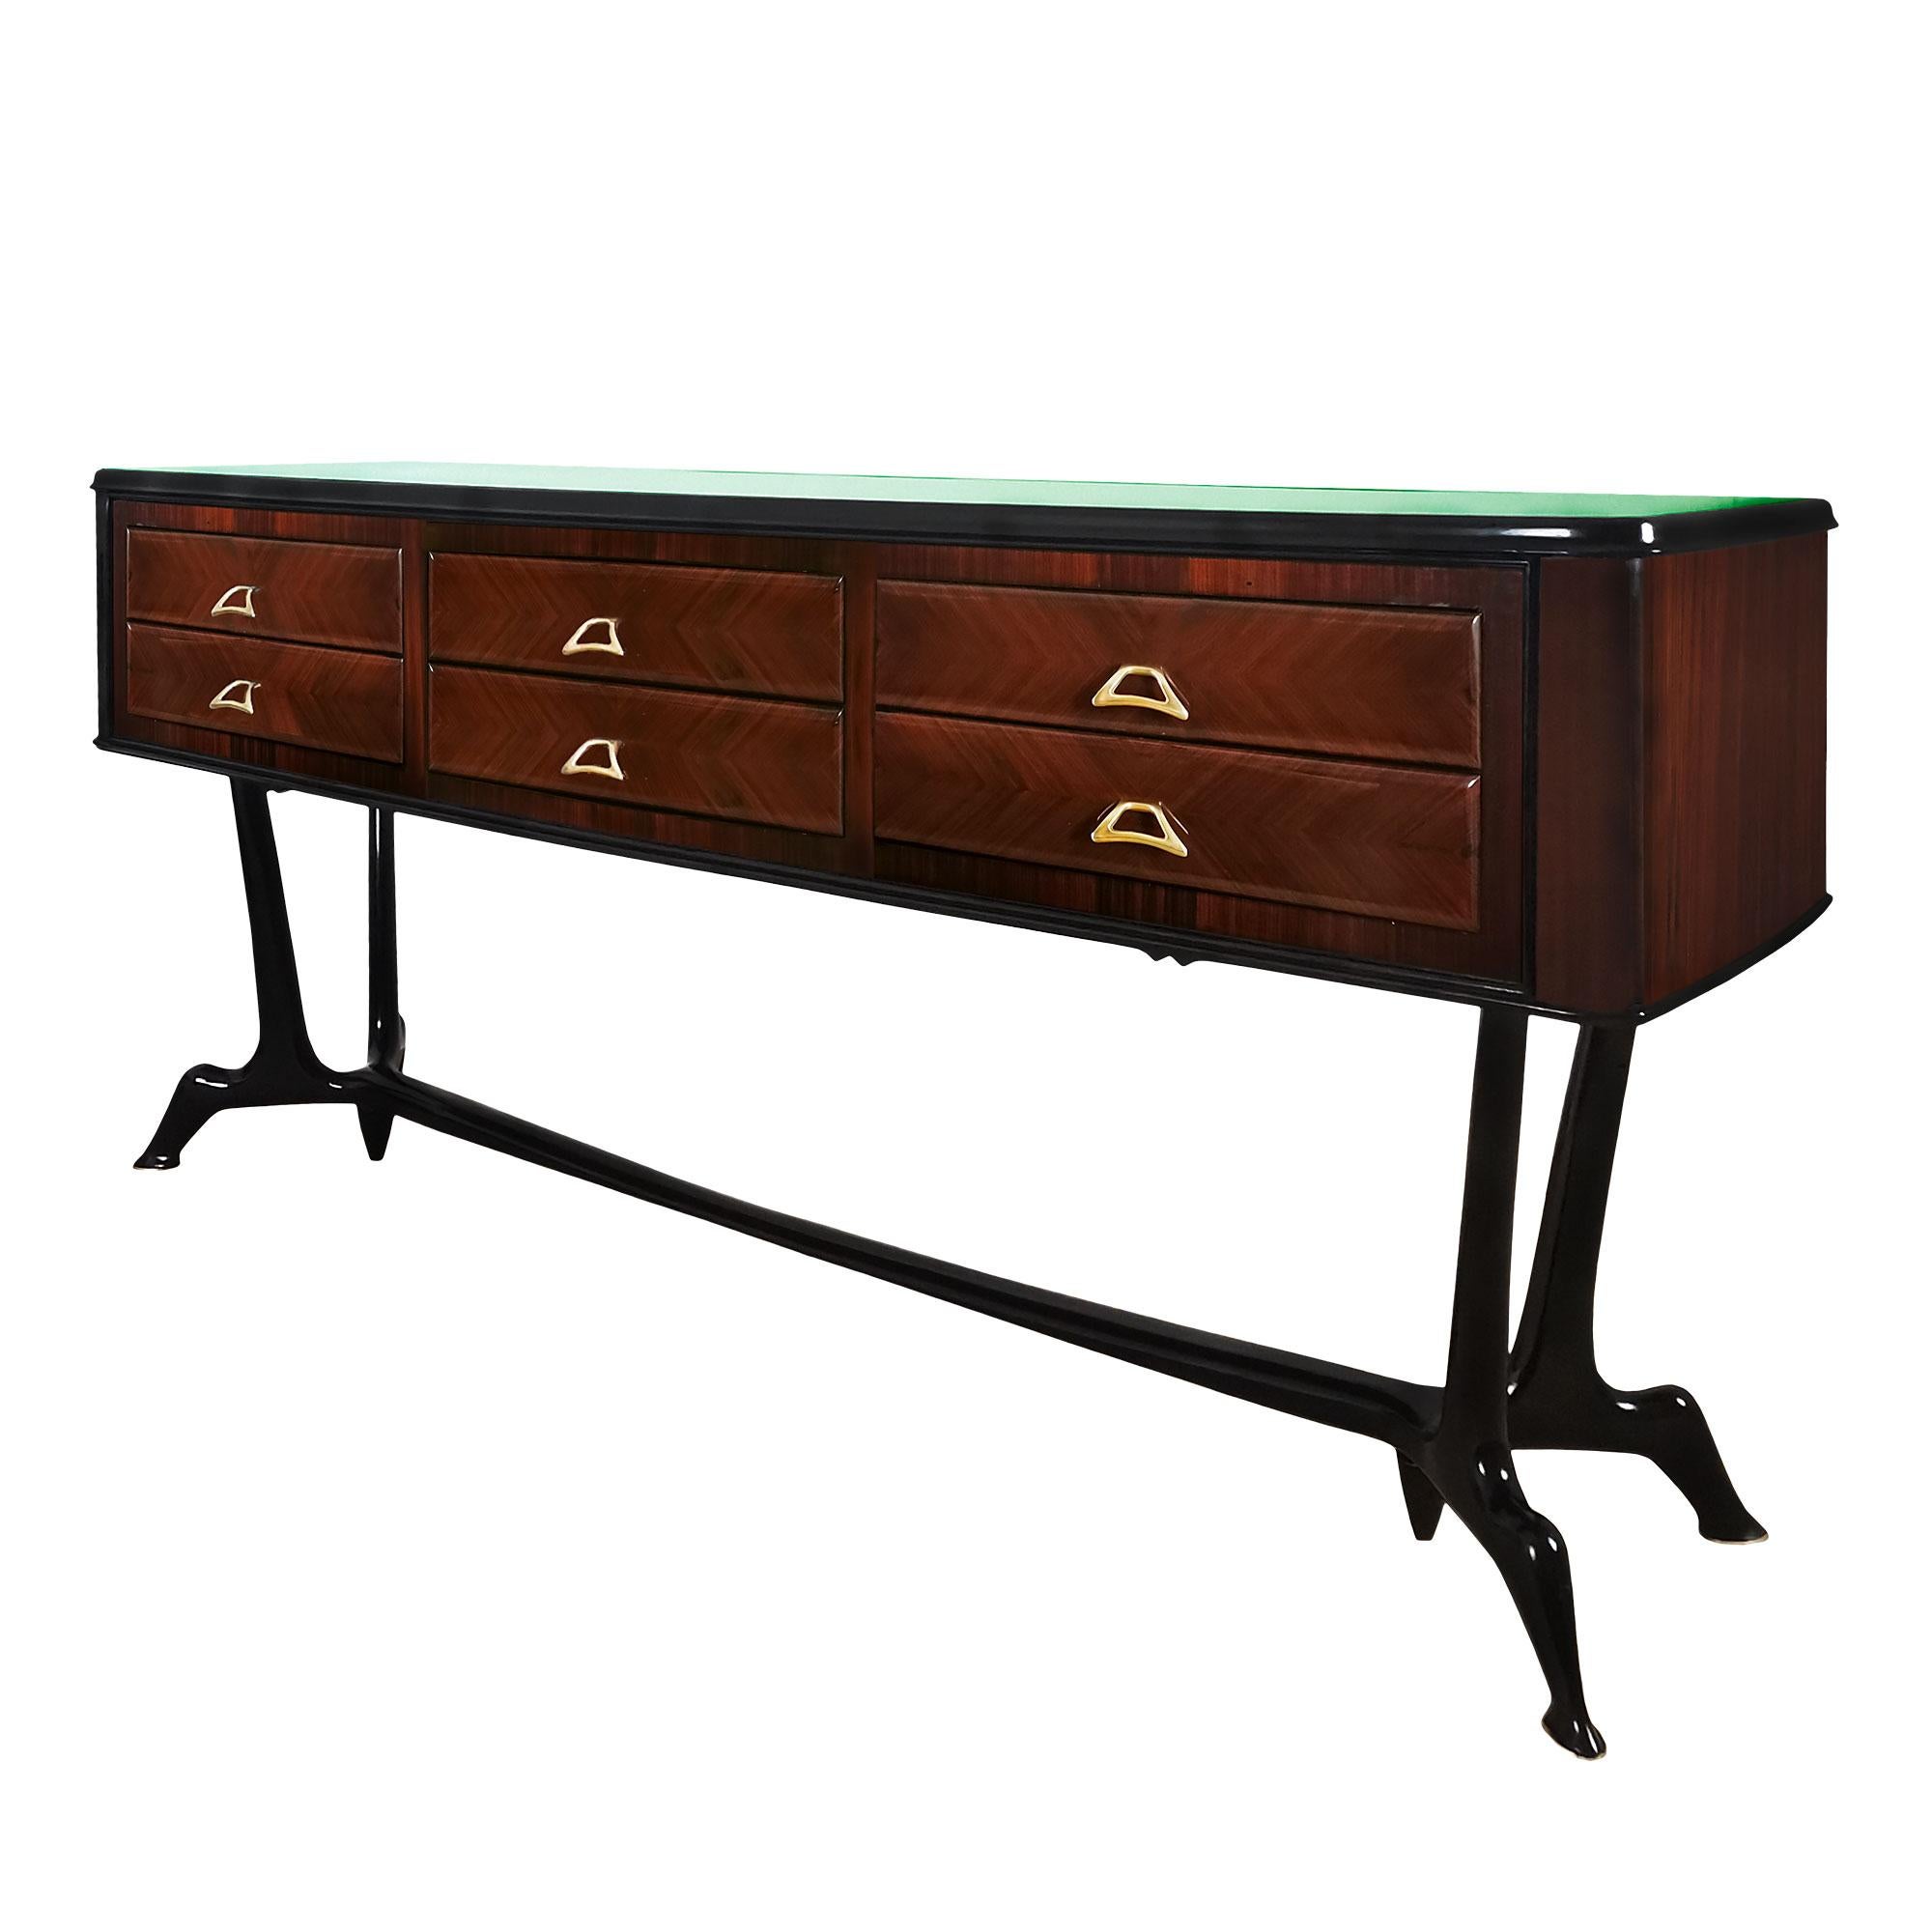 Italian Mid-Century Modern Chest of Six Drawers With Green Glass Top - Italy, 1950 For Sale